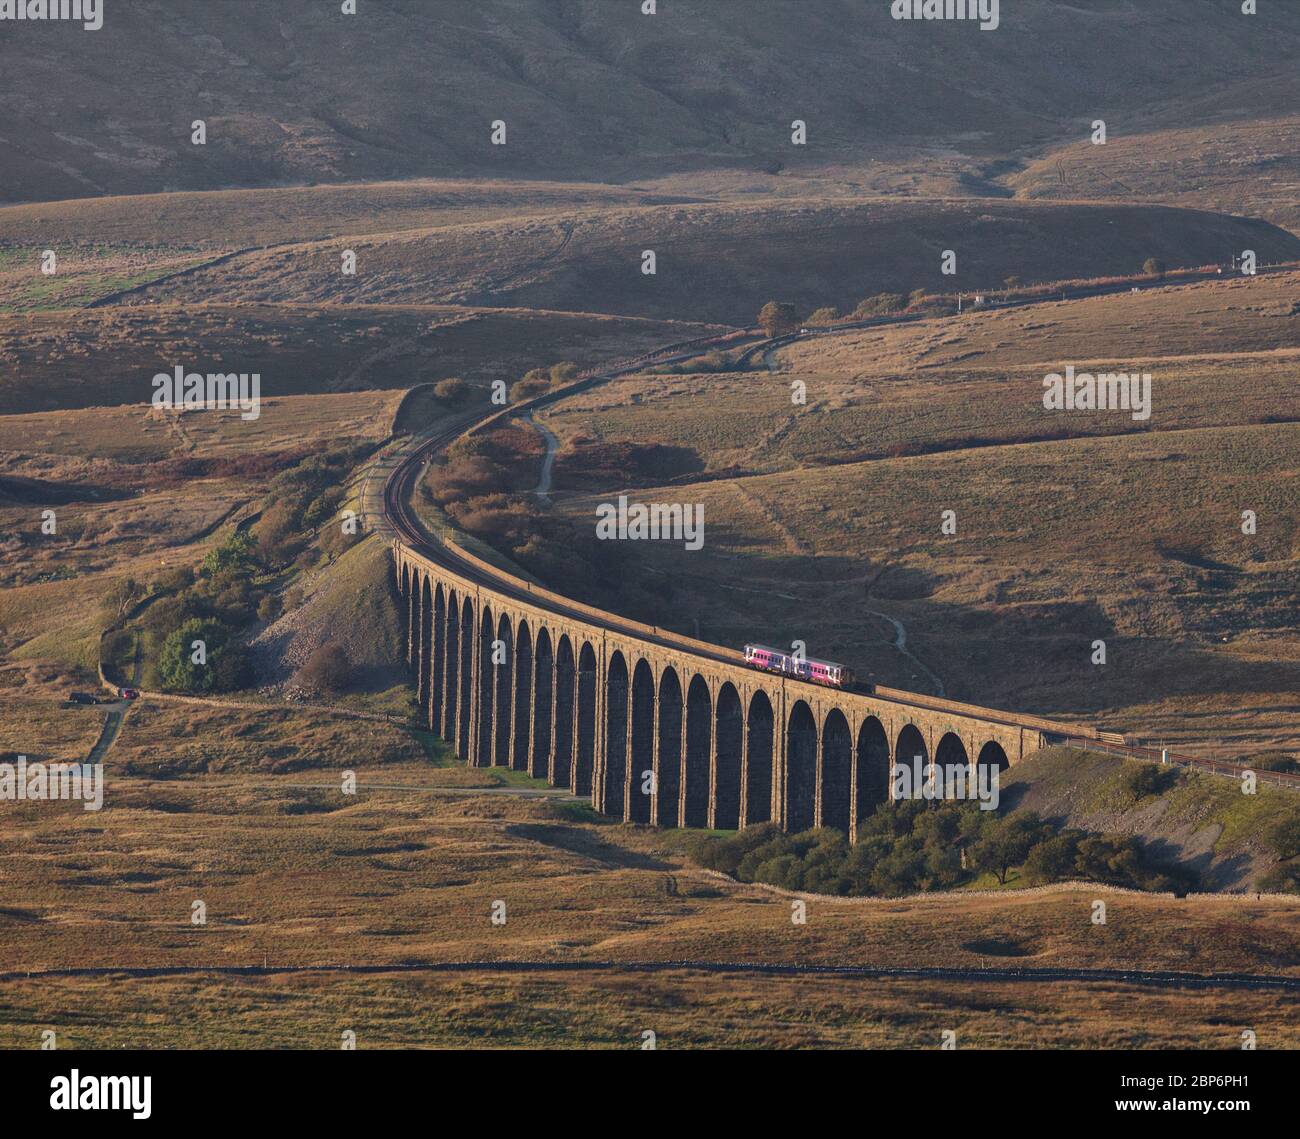 Arriva Northern rail class 158 sprinter train crossing Ribblehead viaduct surrounded by the Yorkshire dales countryside Stock Photo